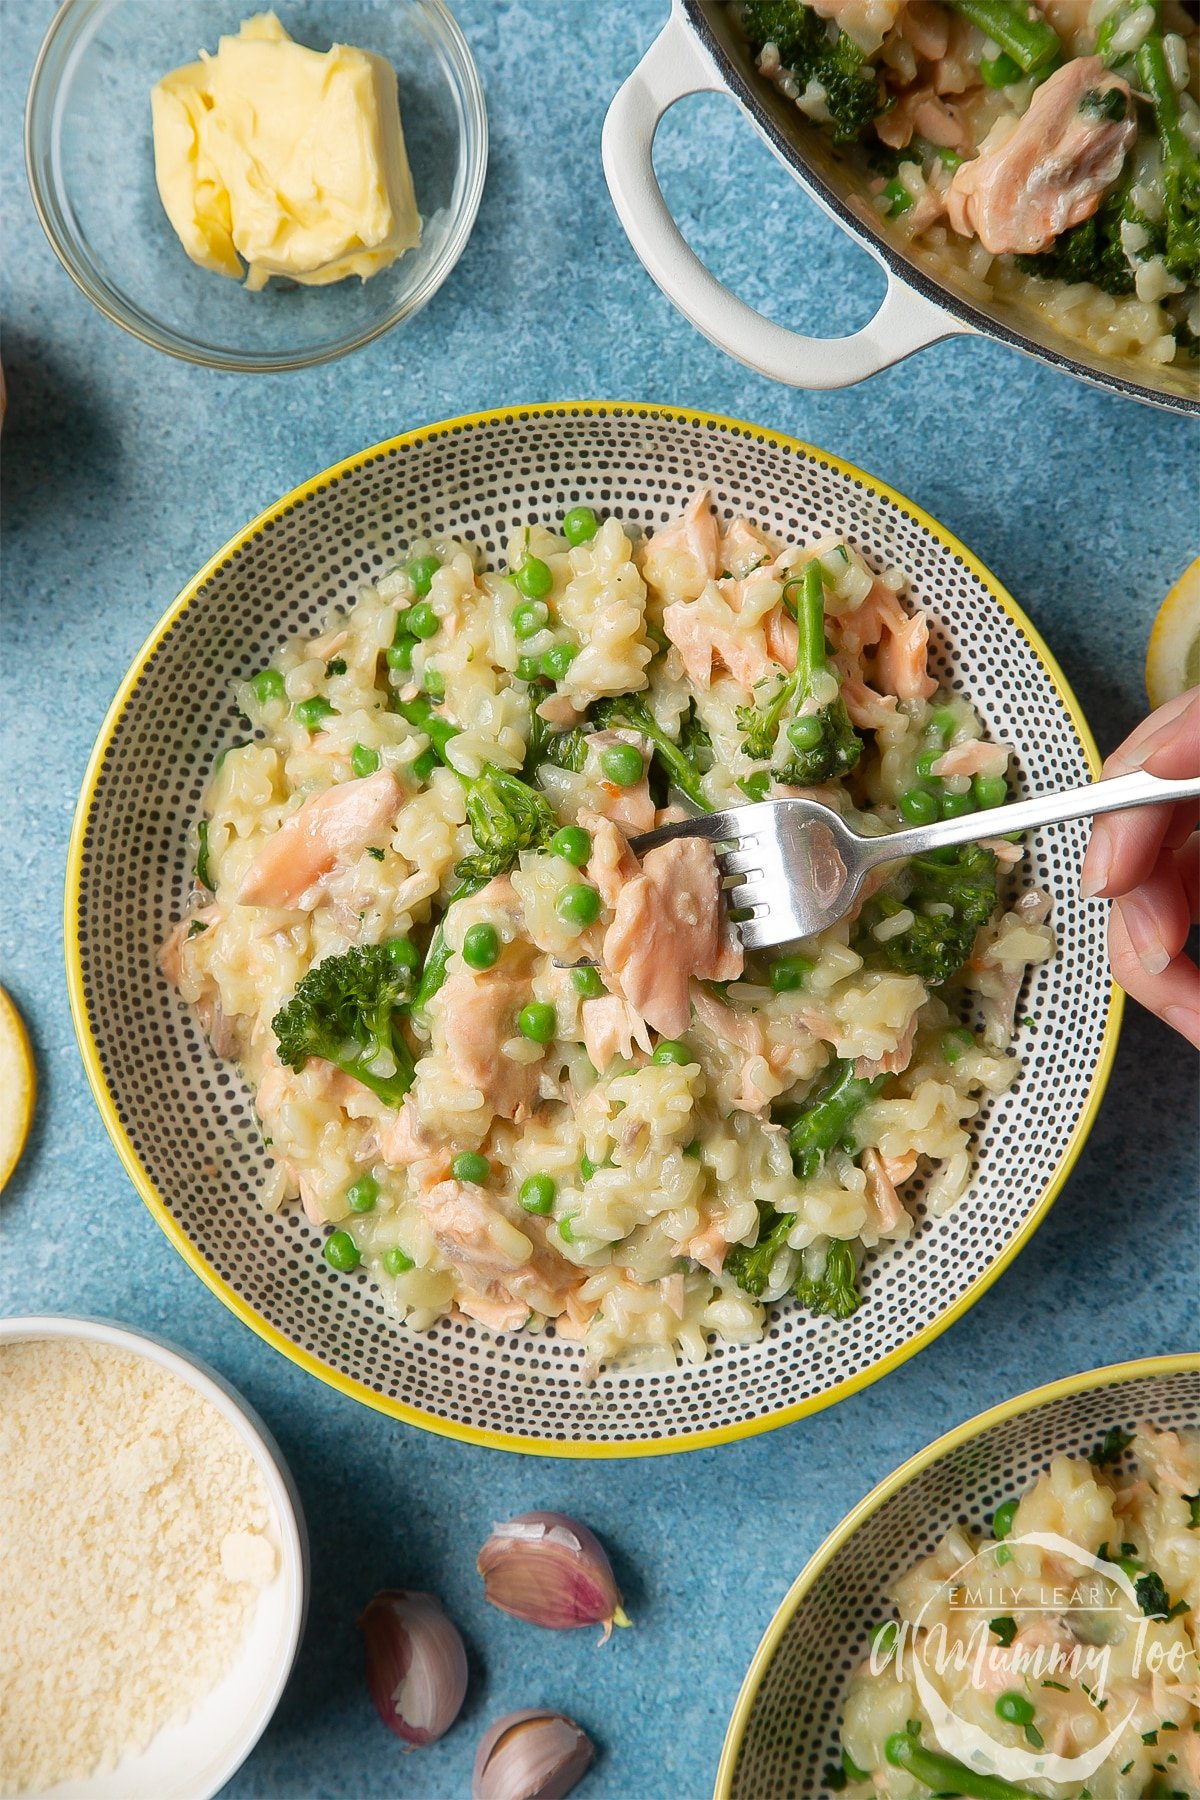 Salmon risotto in a spotted bowl with a yellow rim. A hand holding a fork takes a piece of salmon. Non Traditional Thanksgiving Dinner Ideas.